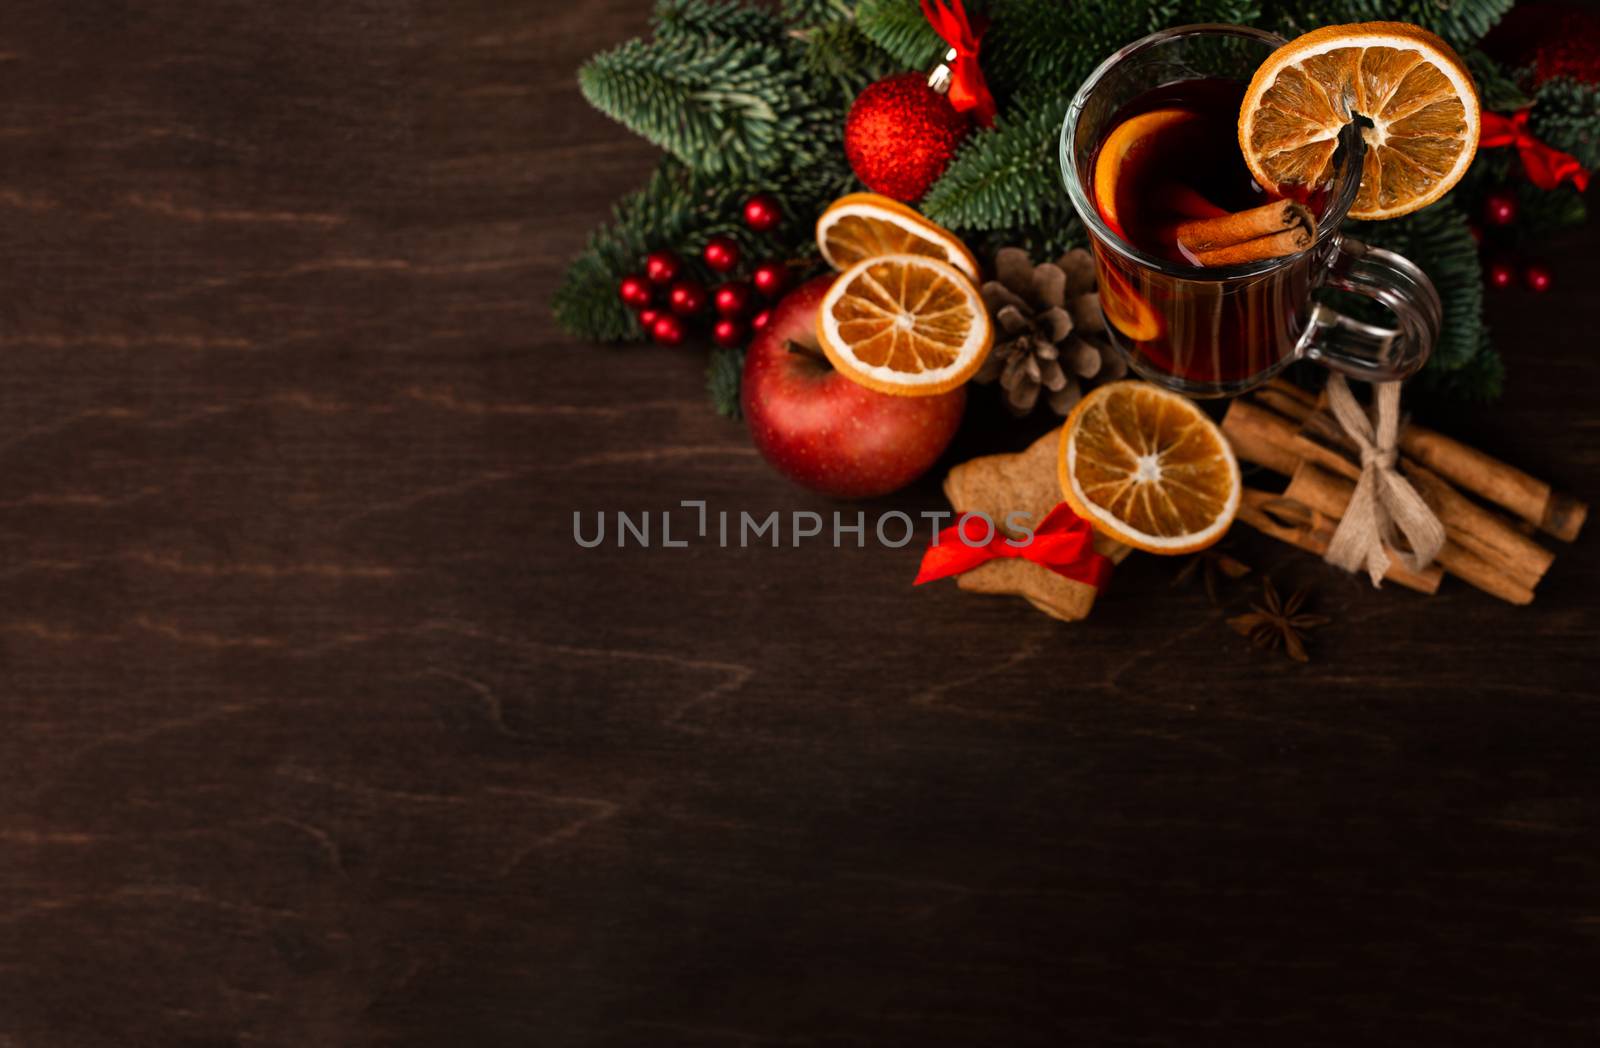 Mulled wine with cinnamon sticks orange fir tree branch and baubles Christmas composition over dark wooden background